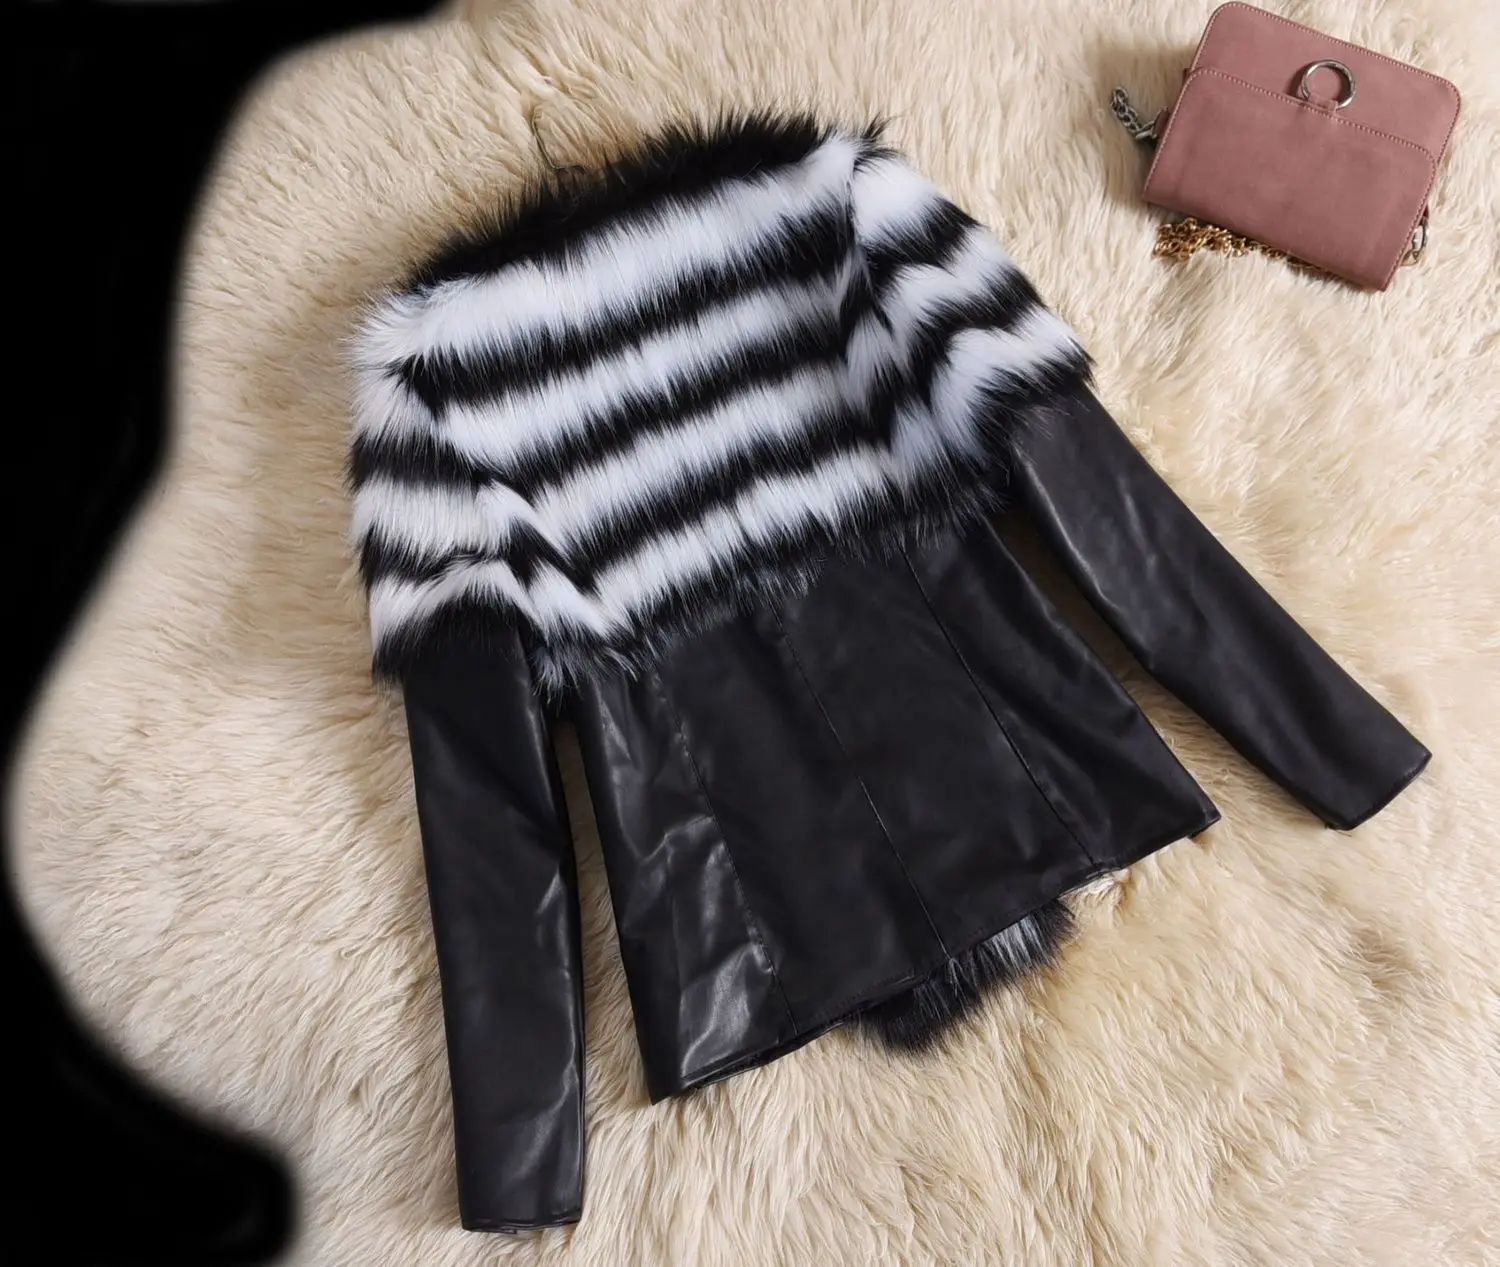 

Leather Jacket For Women 2020 New Winter Fluffy Large Fur Coat Female Motorcycle PU Leather Jackets Plus SIze 6XL LX2394